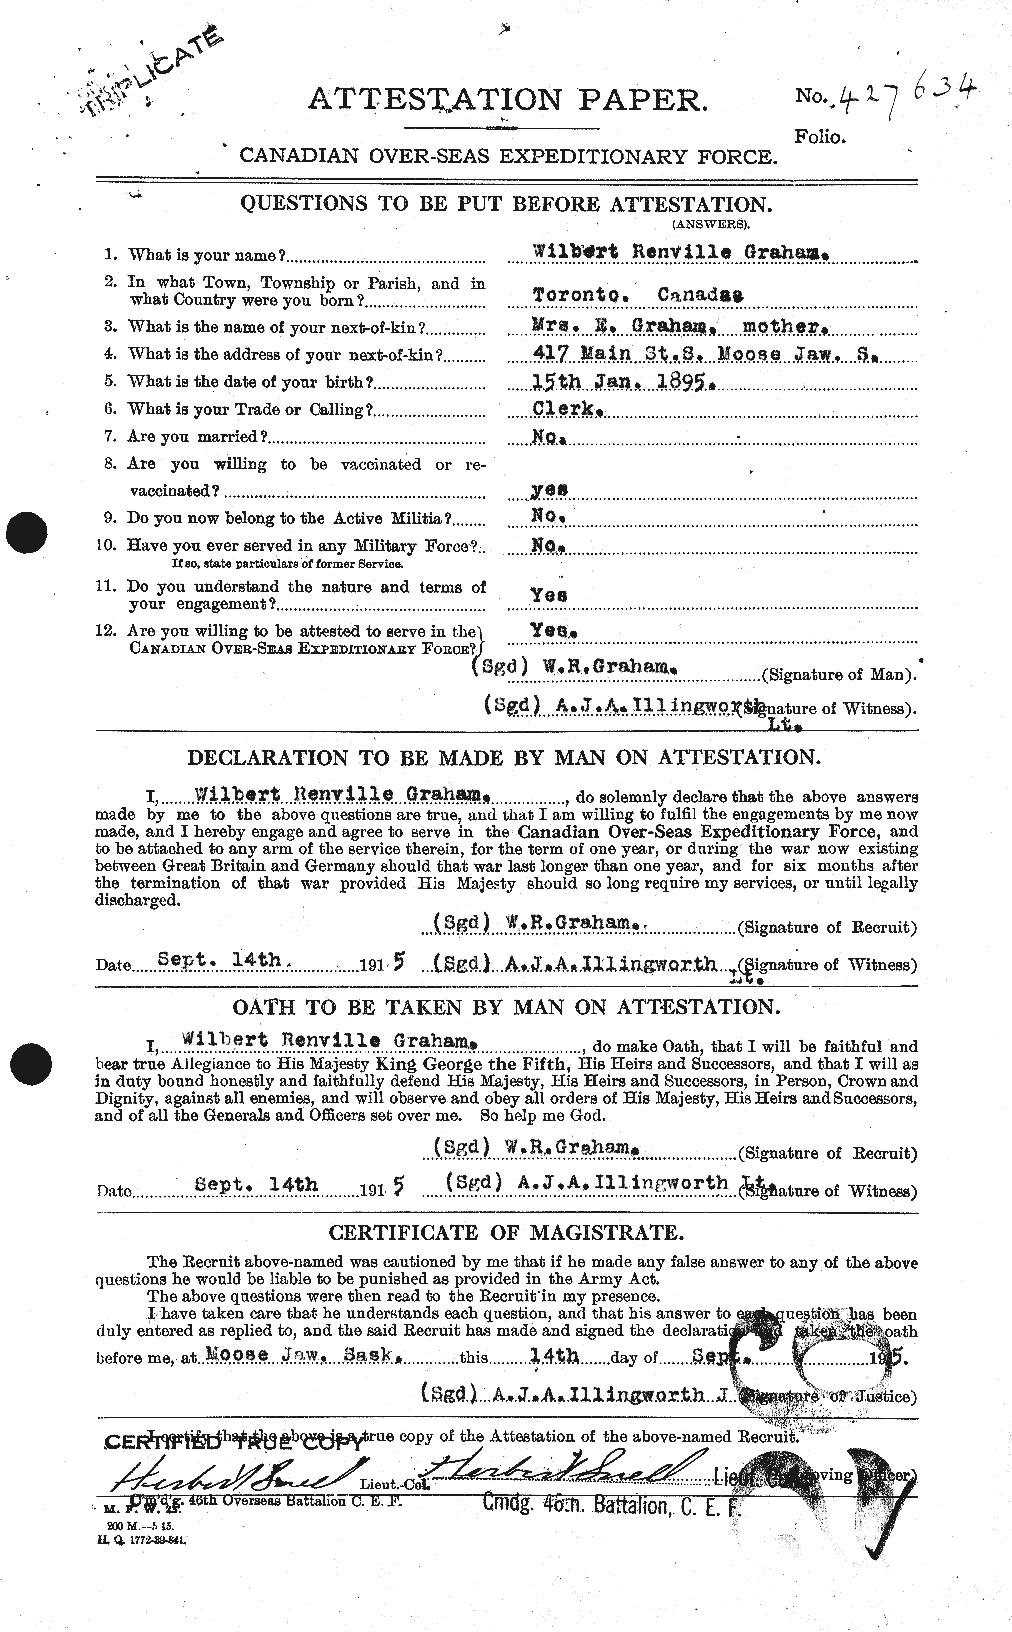 Personnel Records of the First World War - CEF 362670a